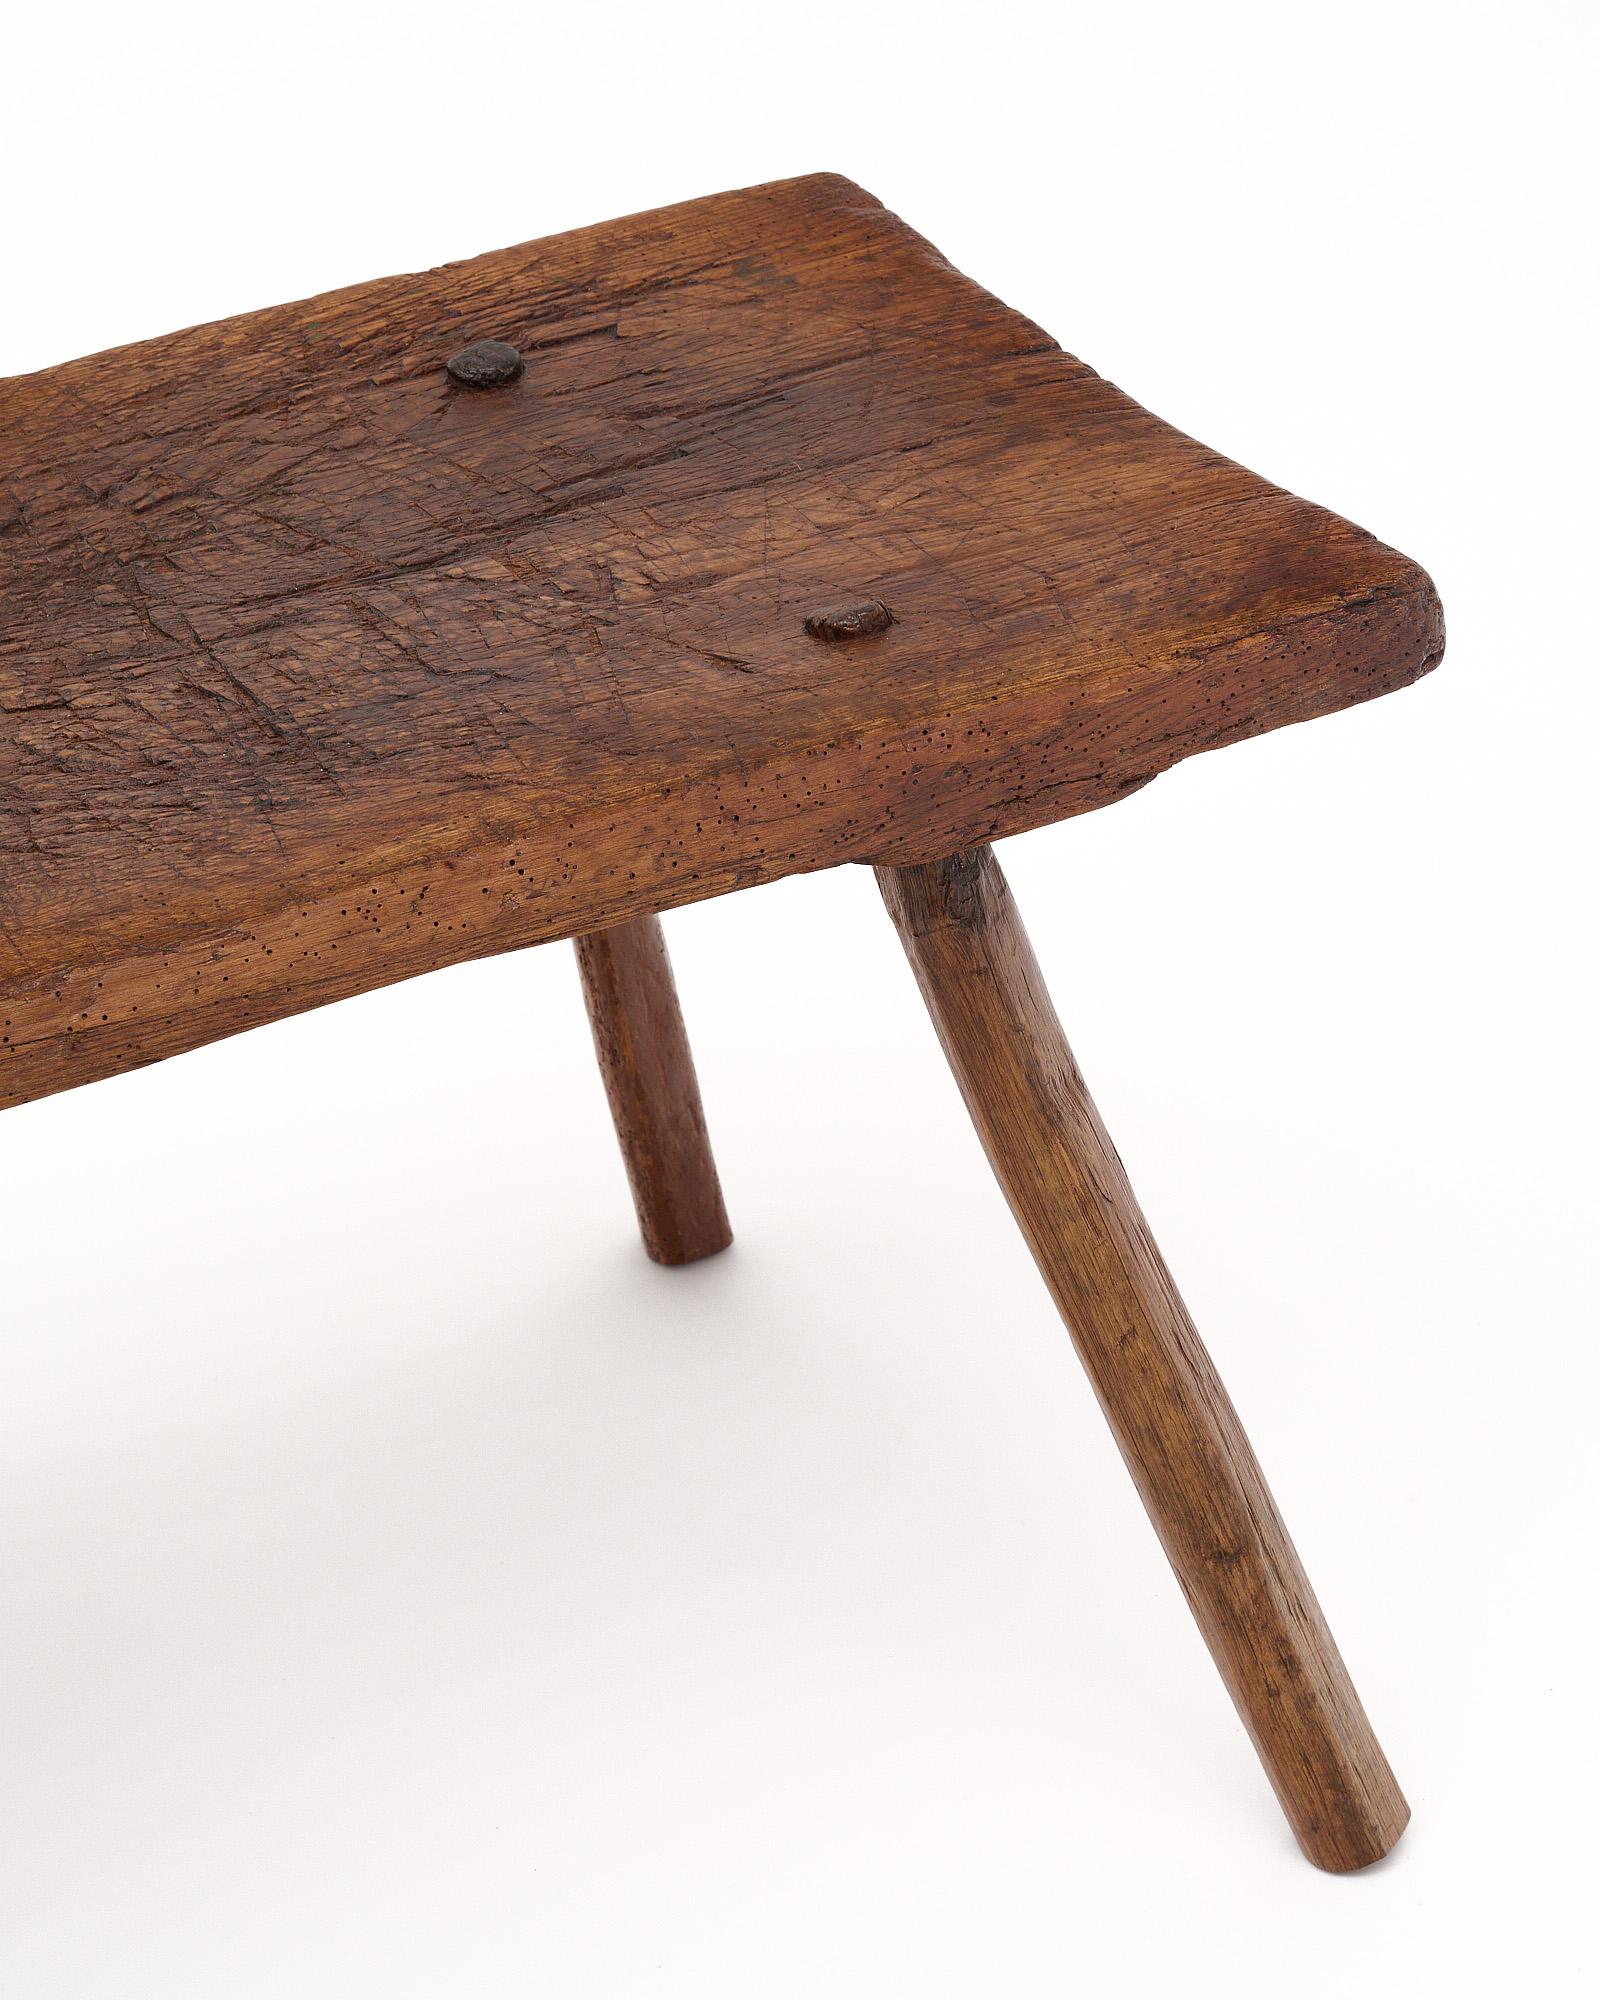 Shepherd table from the Dolomites in Italy. Original patina to the chestnut wood. It is crafted with peg joinery. This piece has four legs supporting a single-plank top.